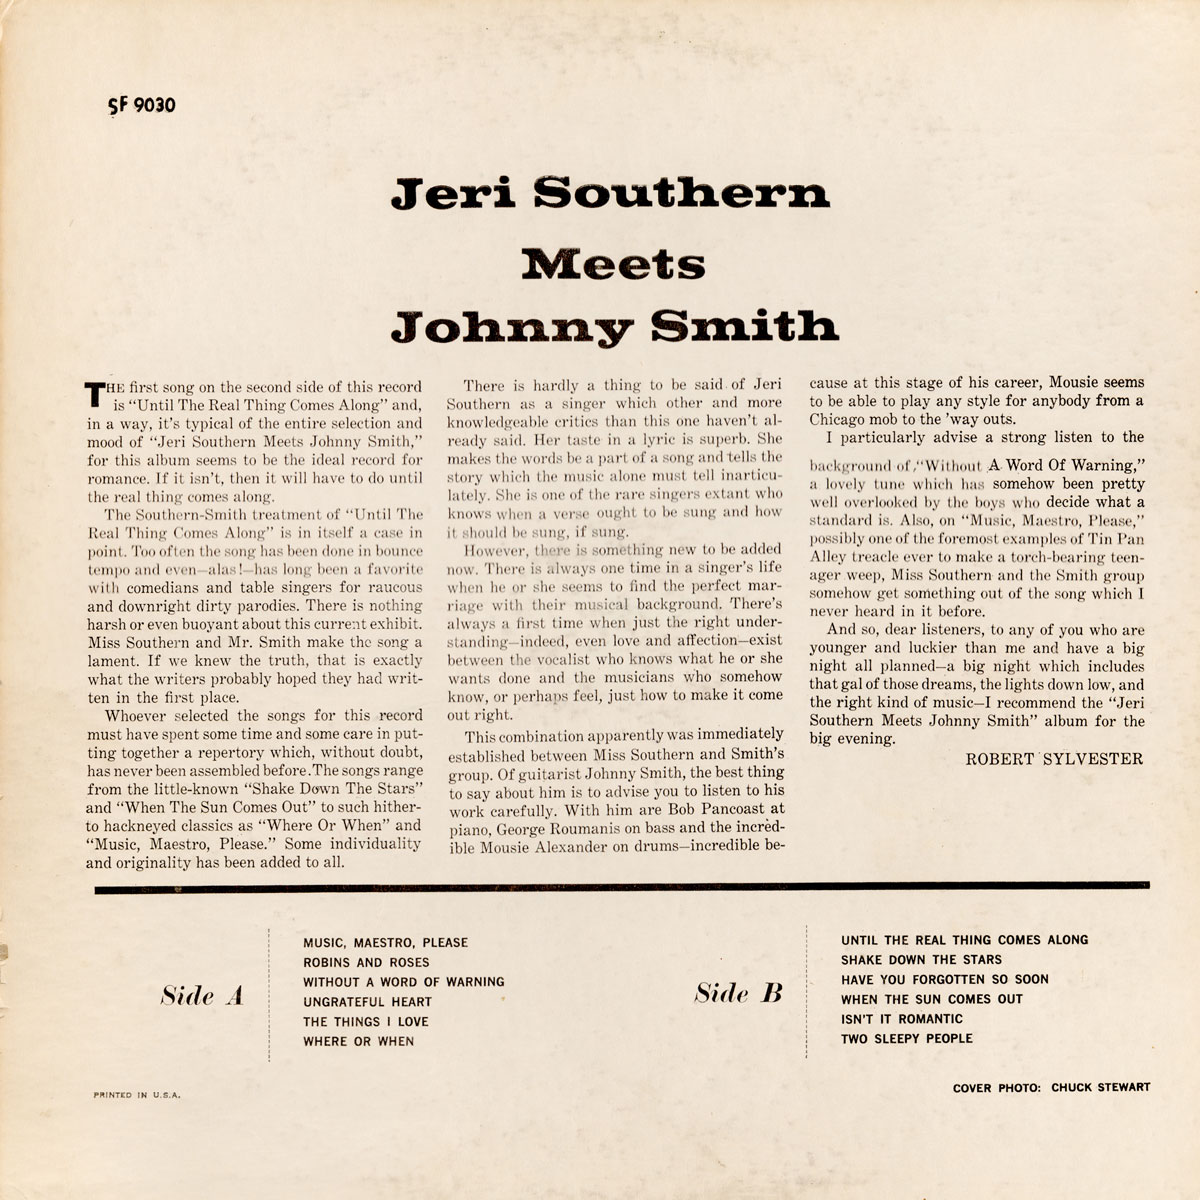 Jeri Southern Meets Johnny Smith - Back cover